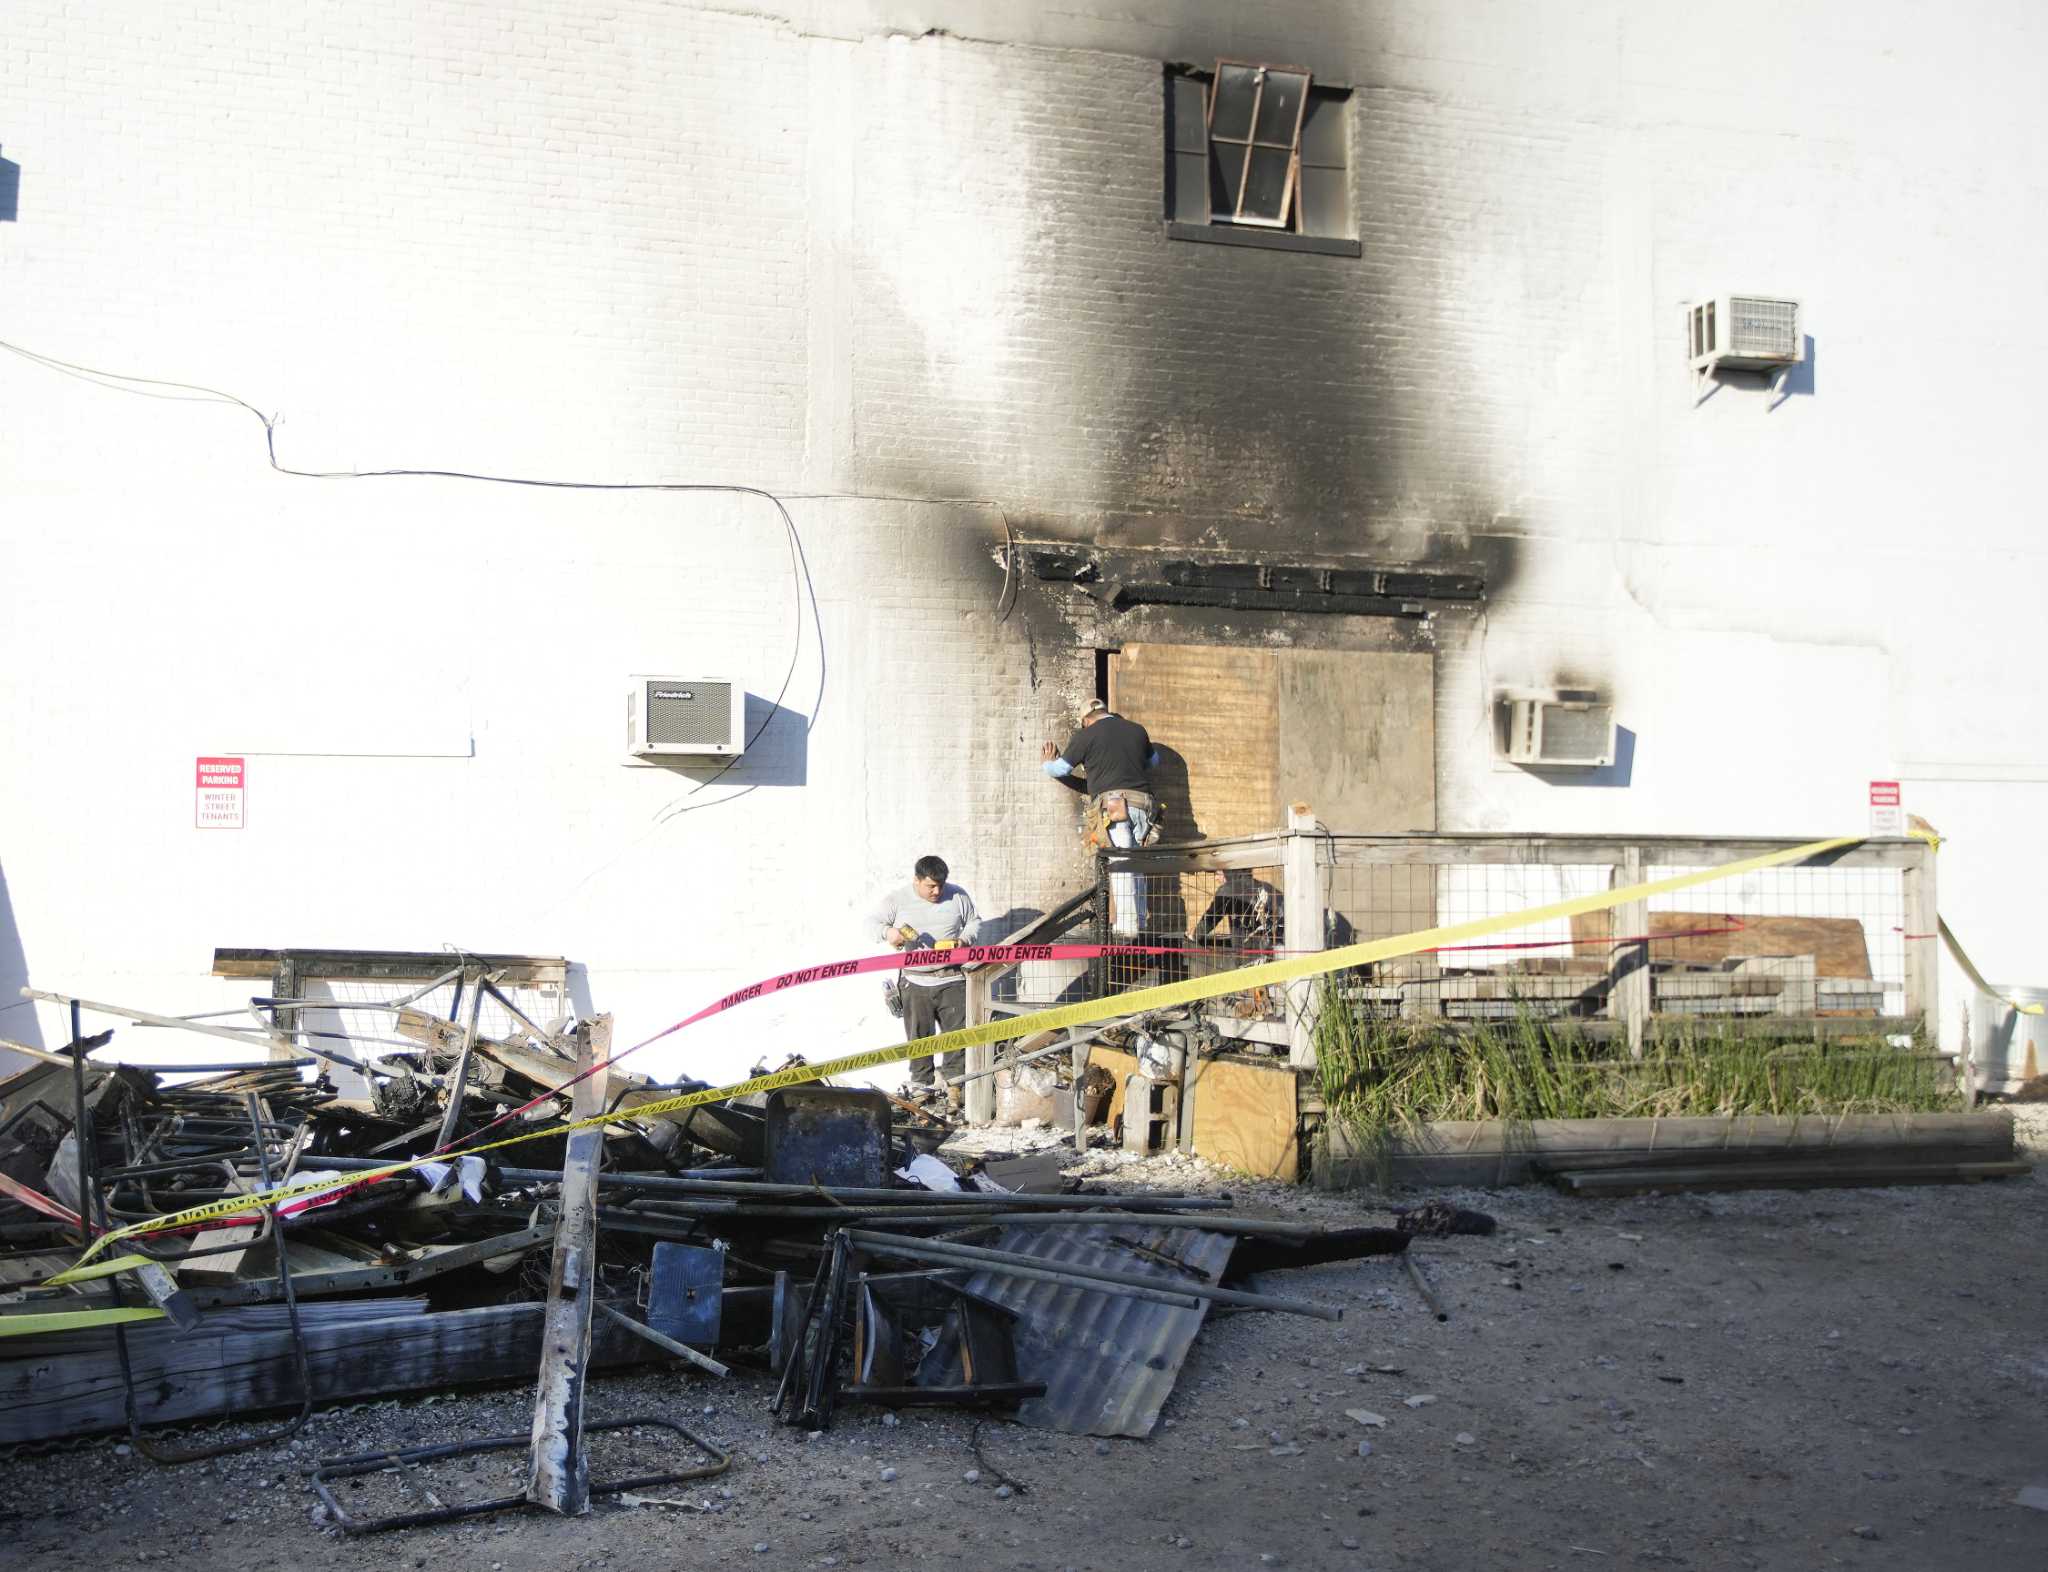 Photographer at Winter Street Studios says he was targeted by arsonist